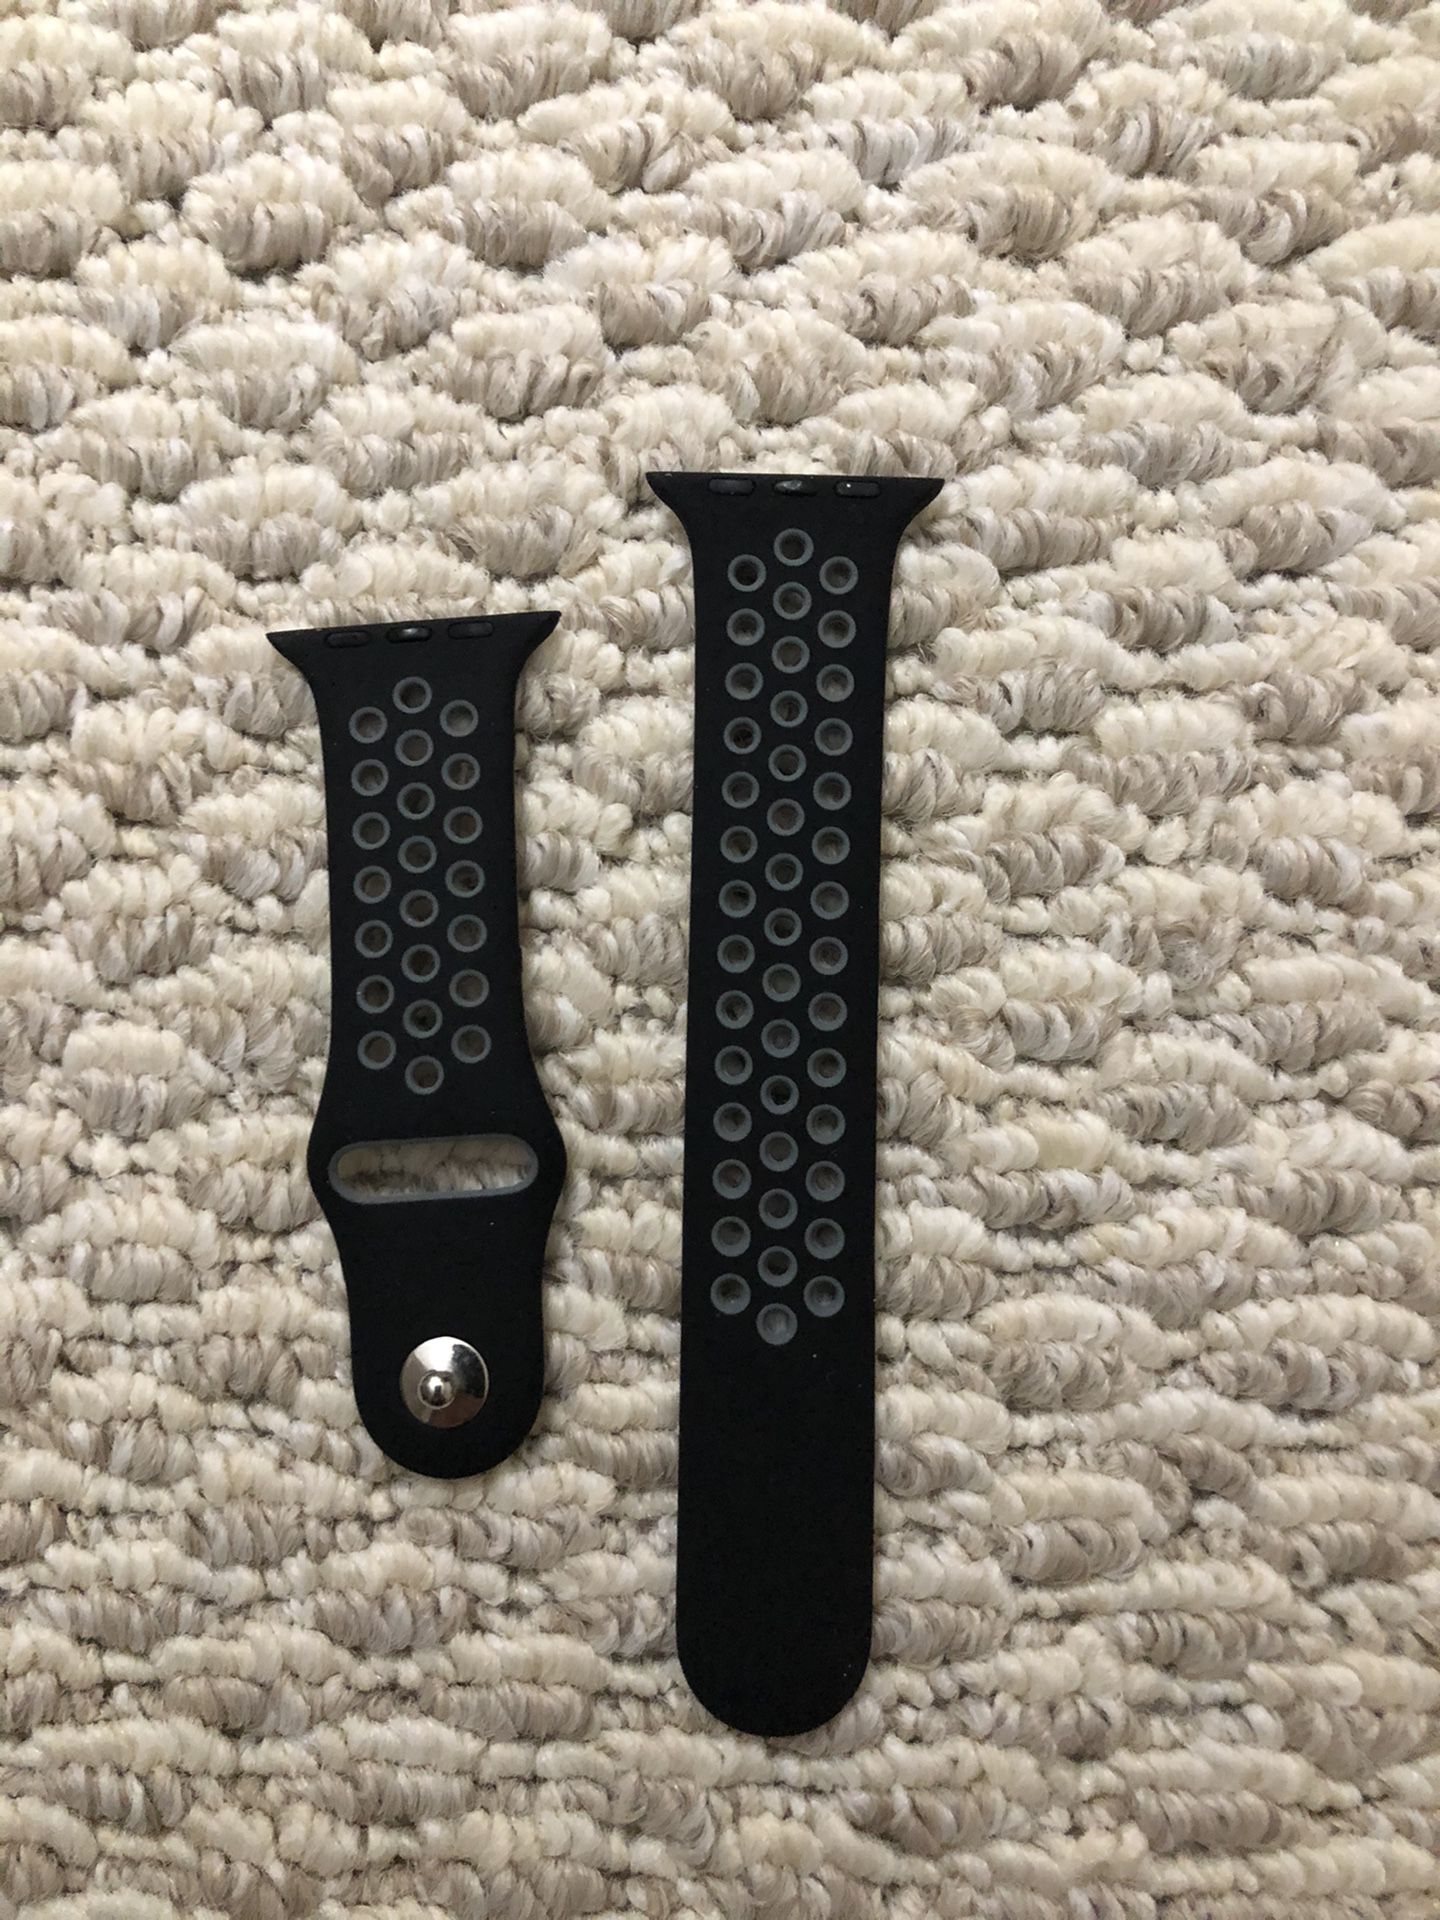 Apple Watch band for sale